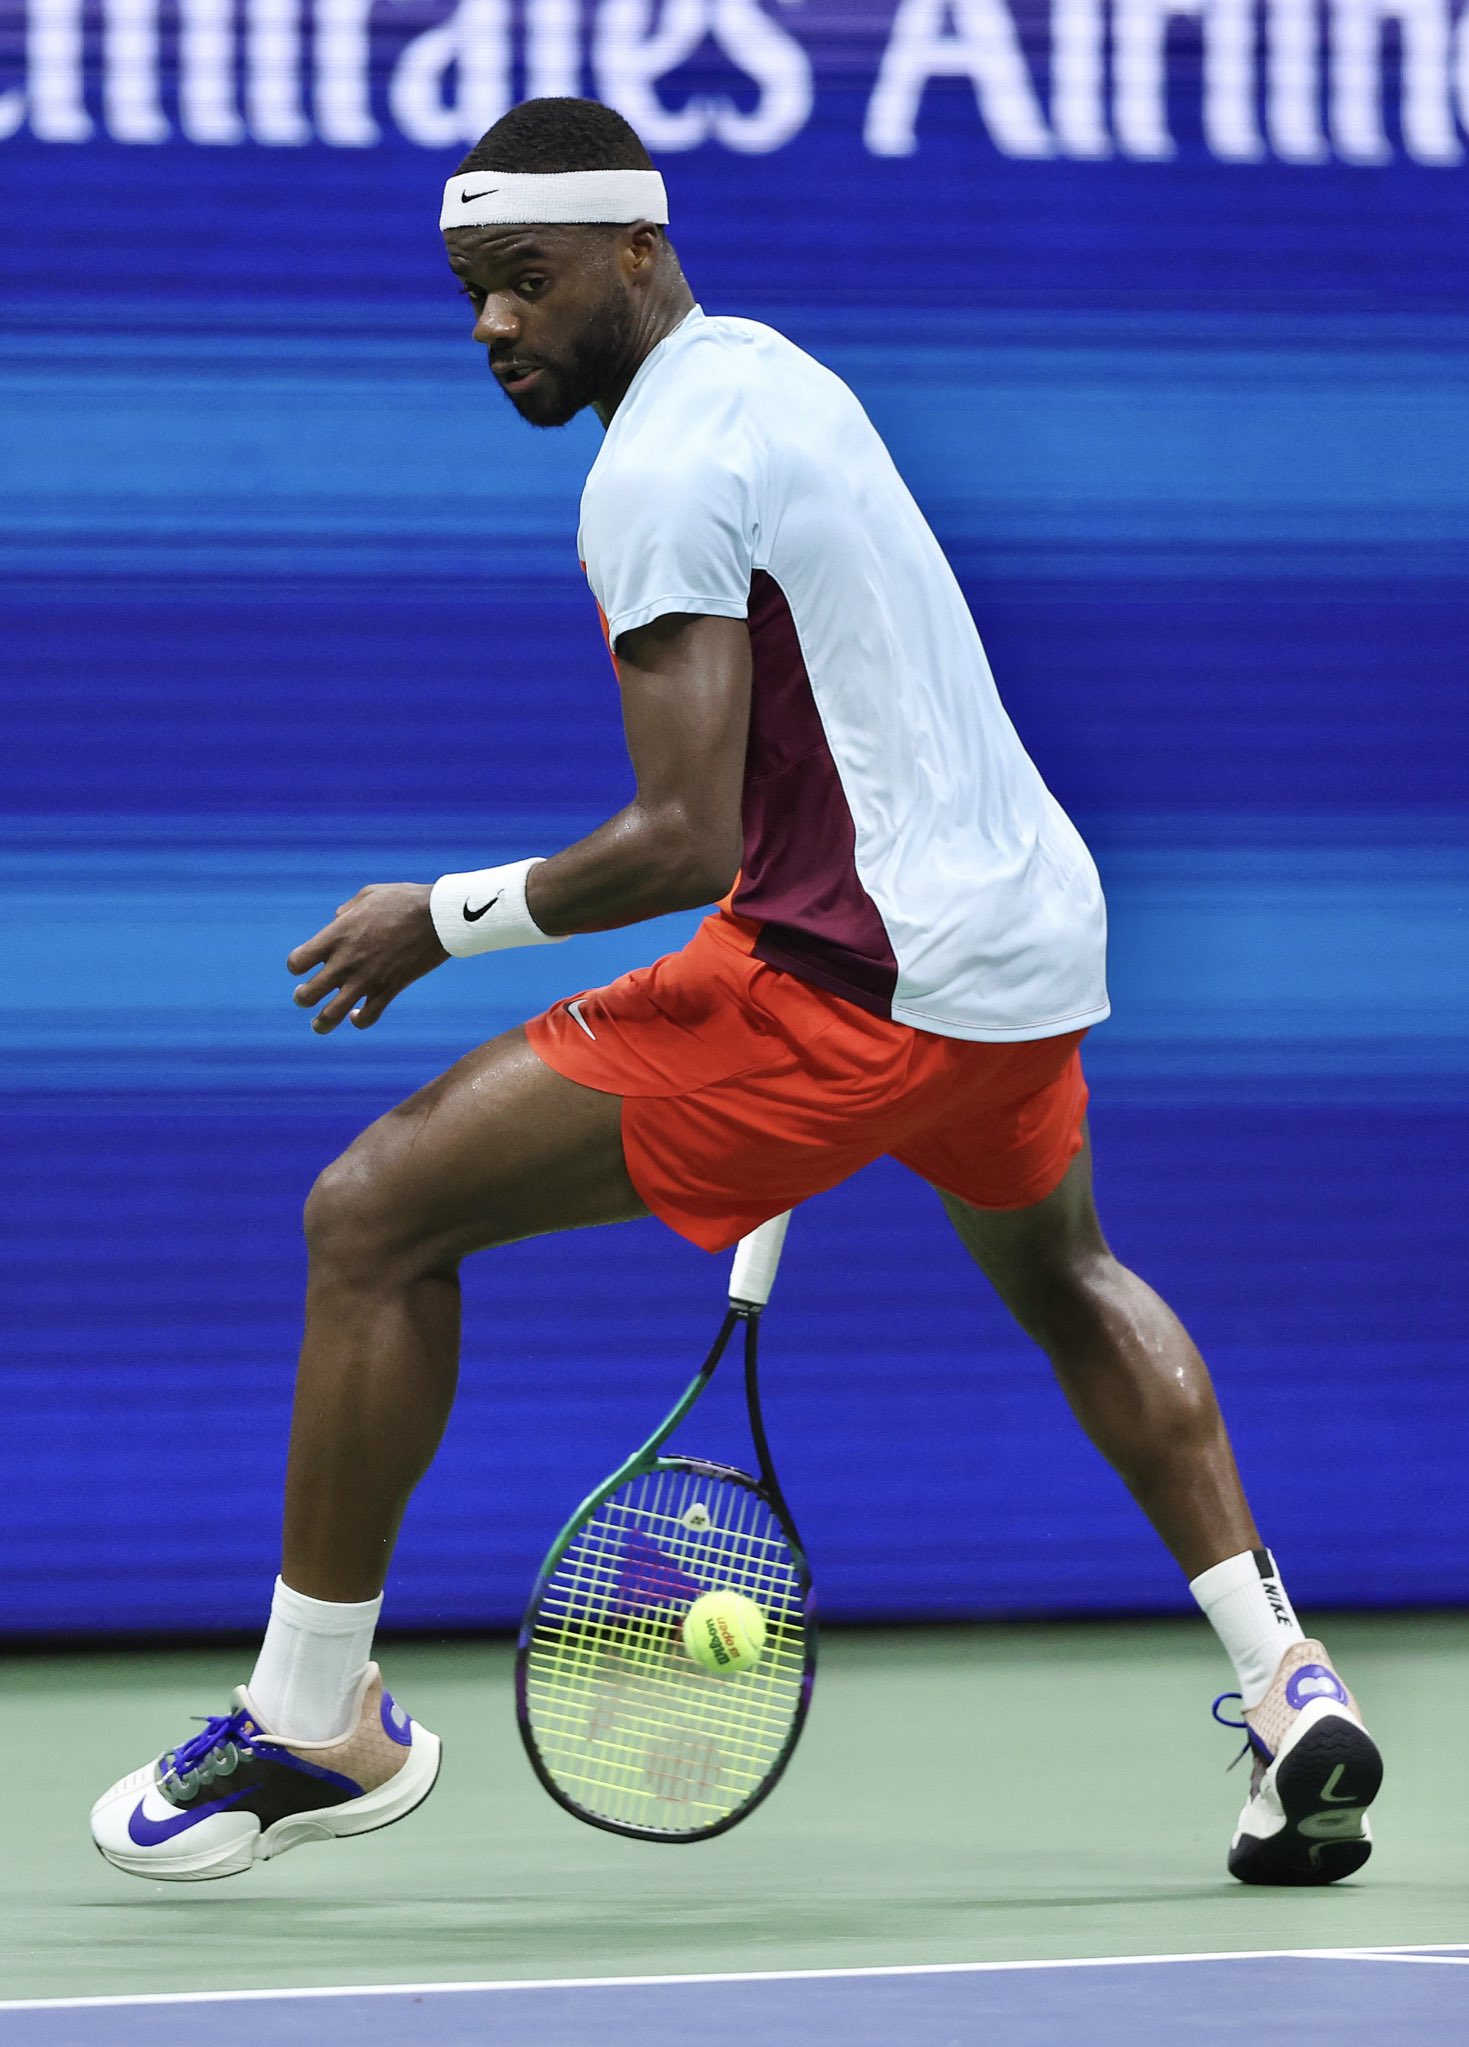 Nick DePaula on Twitter: "Frances Tiafoe is once again wearing  @NaomiOsaka's NikeCourt shoes at the #USOpen The colorway is inspired by  Naomi's bulldog Butta, who is featured on the insole.  https://t.co/Saqsmpa35J" /